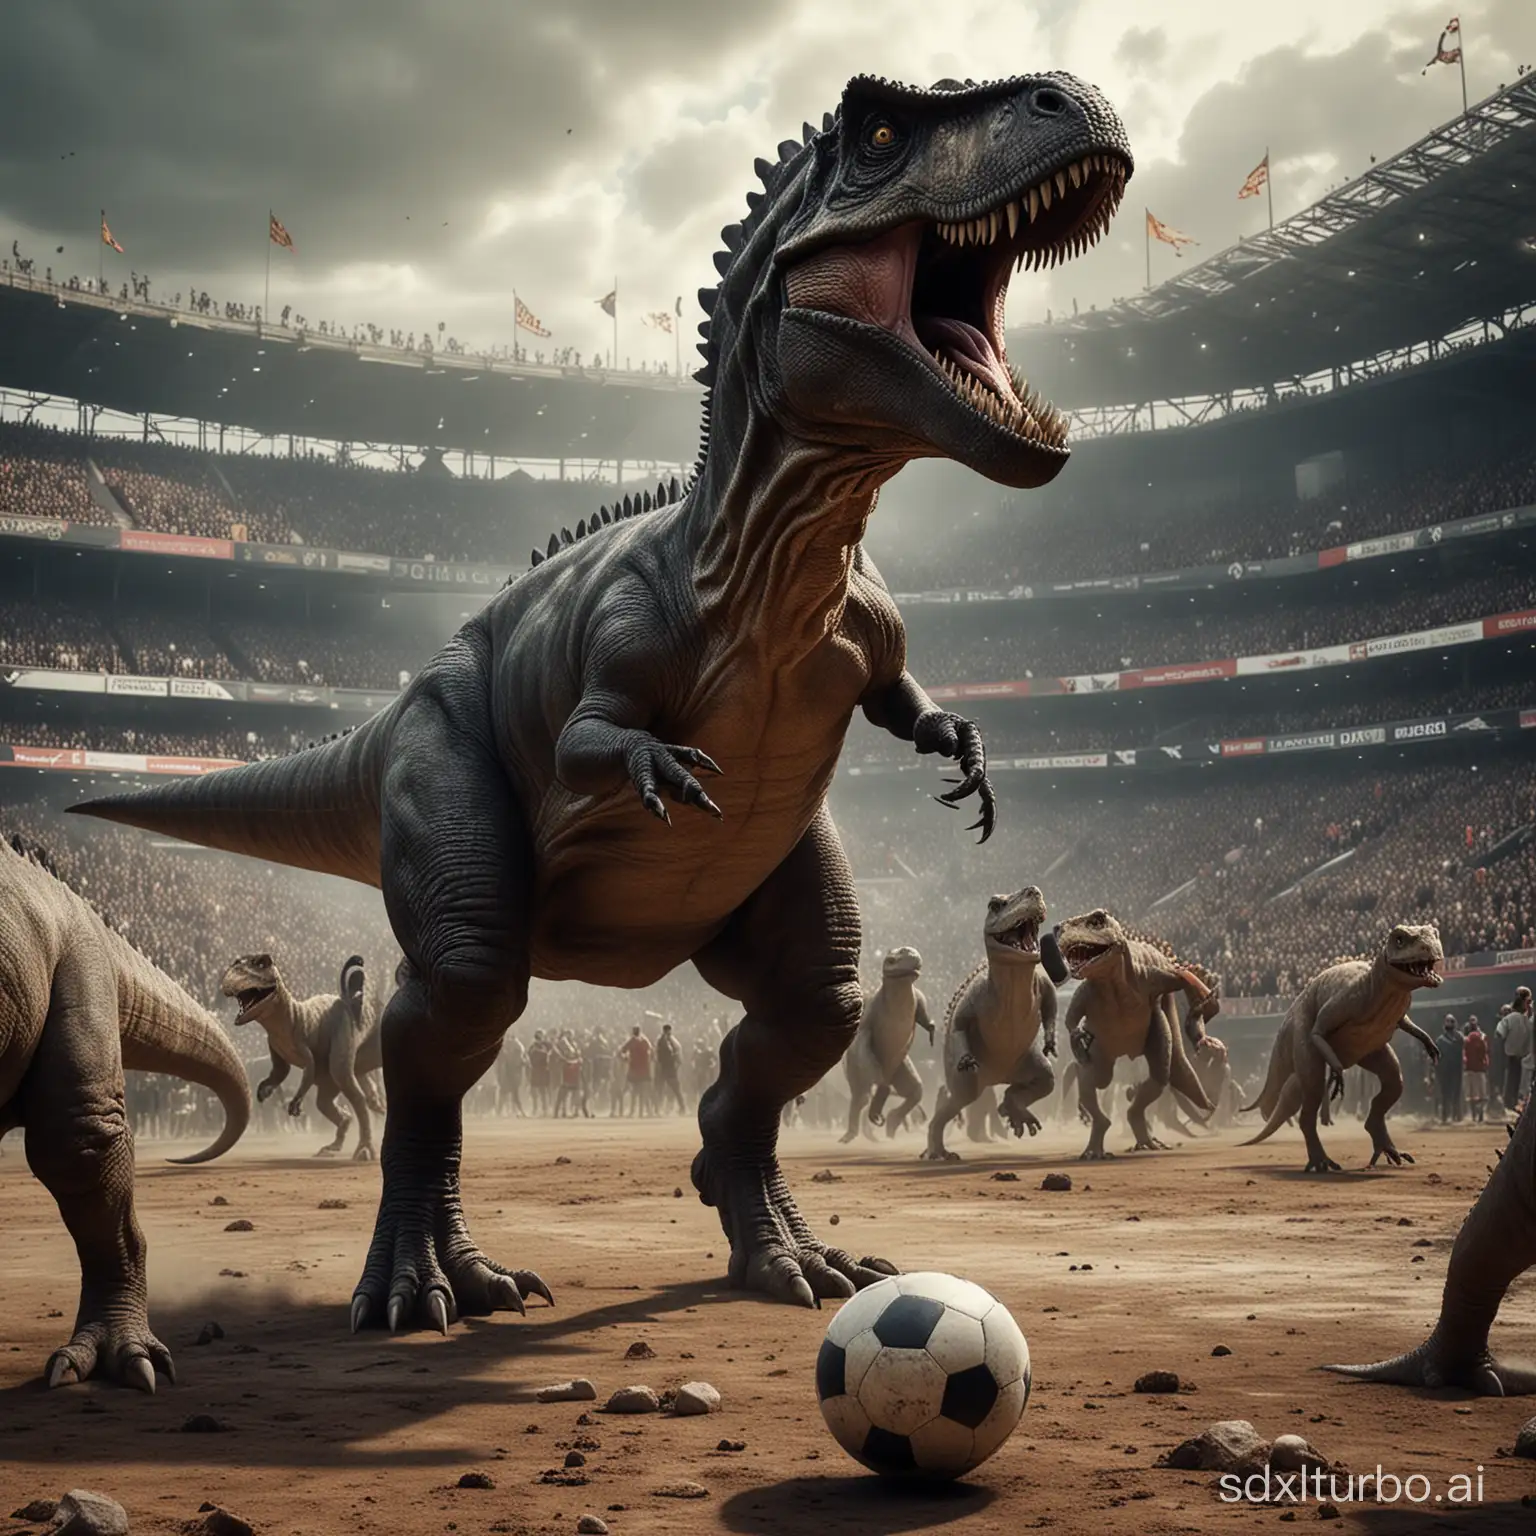 Dinosaurs playing football in a different world in the football ground, detail, and high definition images, animals crowd outside the ground cheering, their world is like Game of Thrones world, stadium is in black castle old theme, no humans only dinosaurs